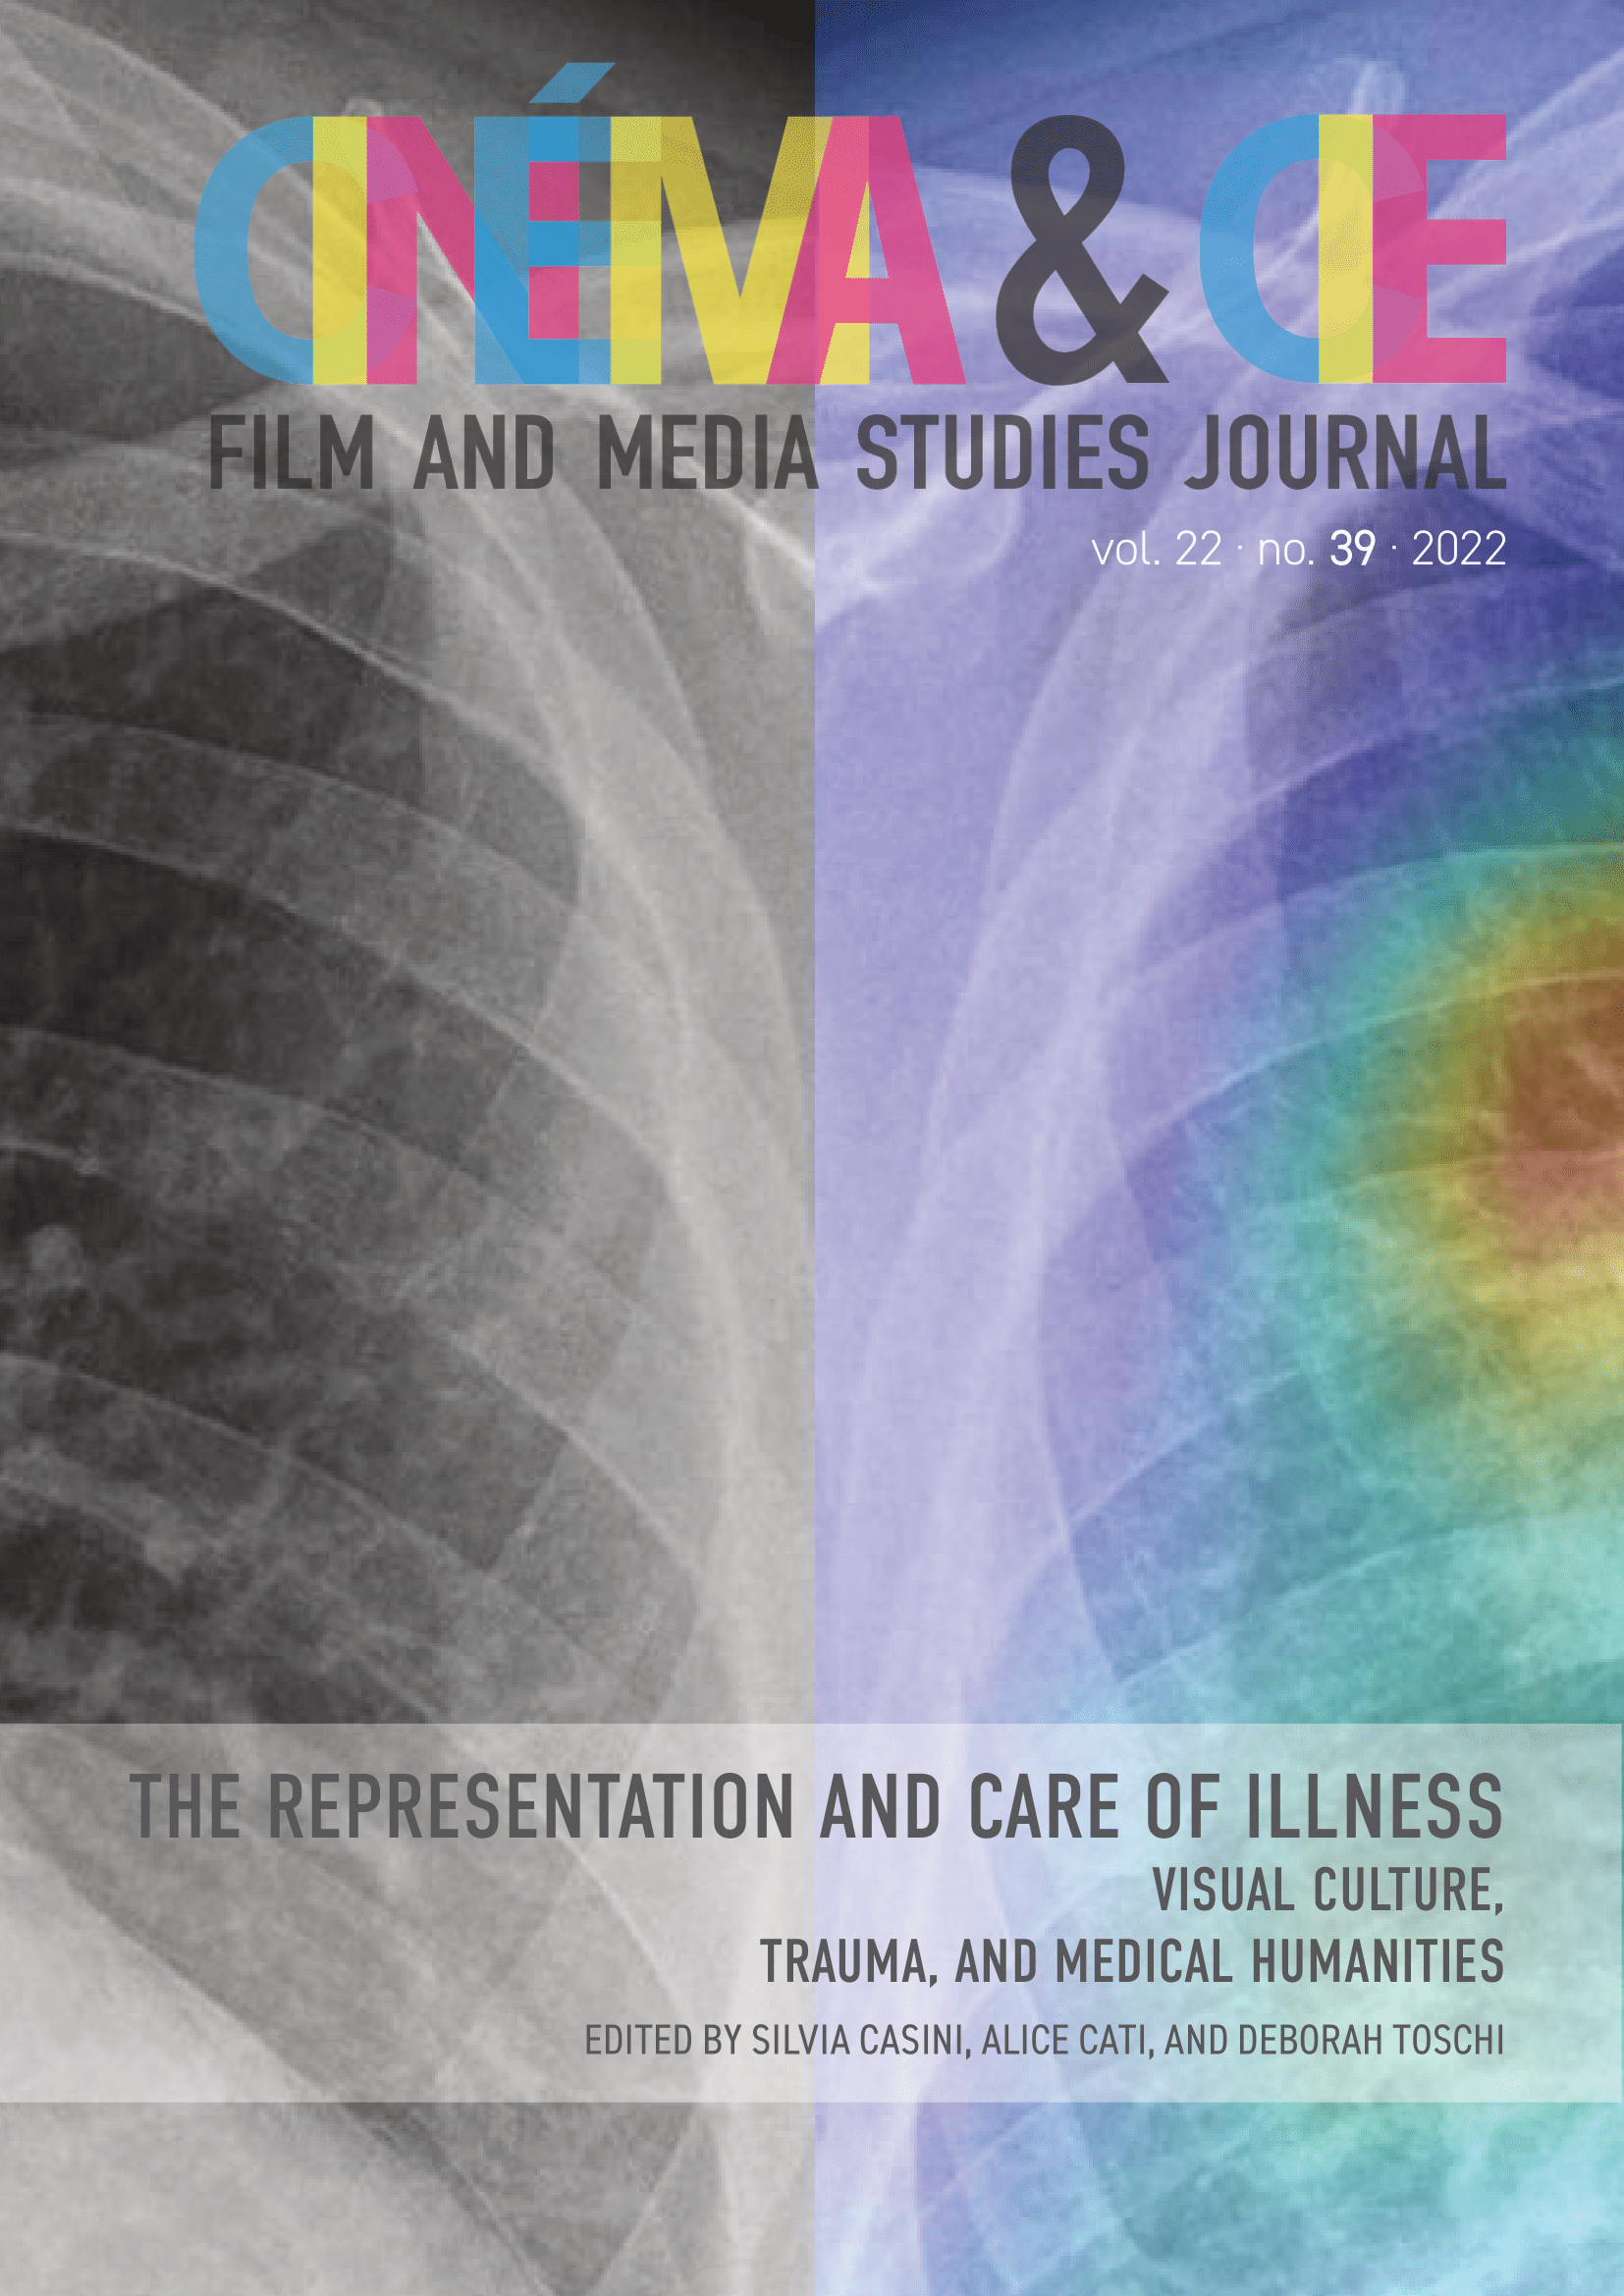 					View Vol. 22 No. 39 (2022): The Representation and Care of Illness. Visual Culture, Trauma, and Medical Humanities
				